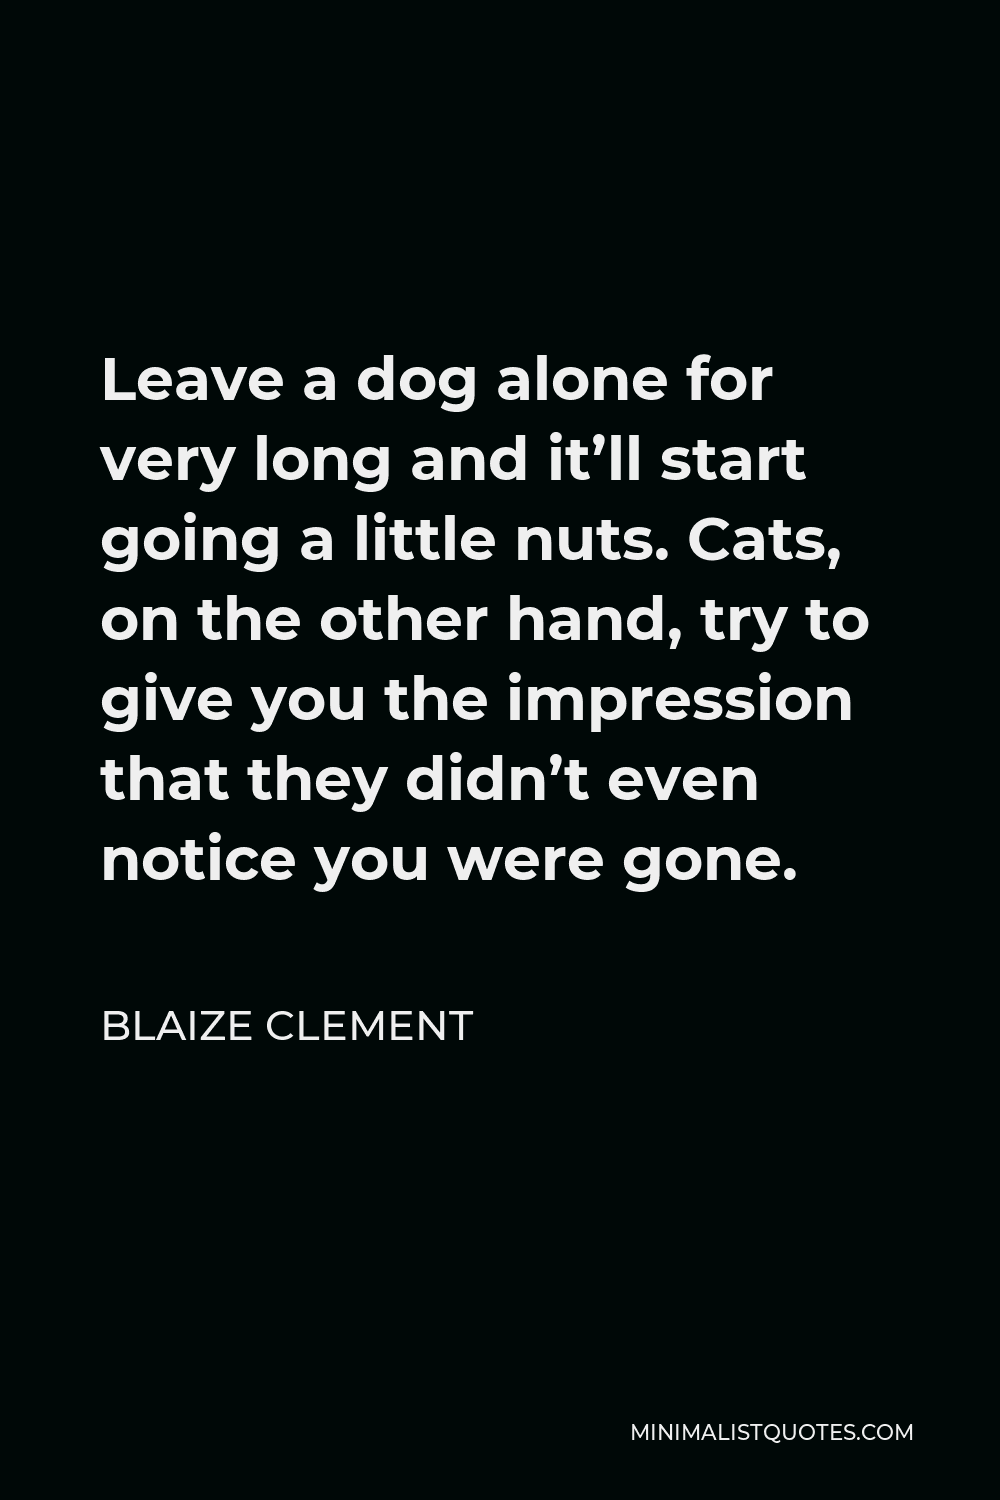 Blaize Clement Quote - Leave a dog alone for very long and it’ll start going a little nuts. Cats, on the other hand, try to give you the impression that they didn’t even notice you were gone.